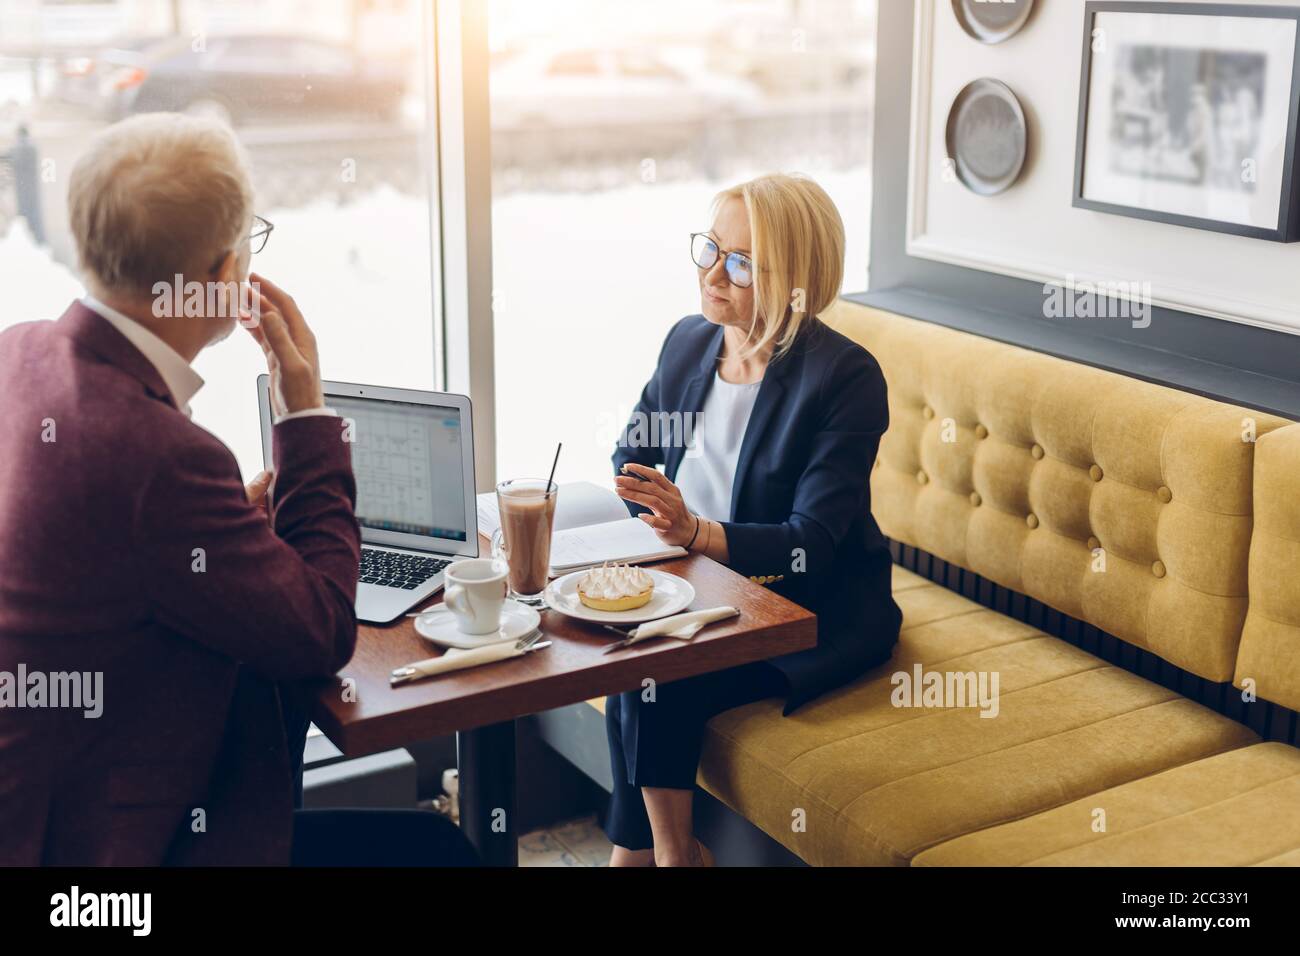 Two Clever People Brainstorming At Cafe Developing Business Strategy Using Laptop Looking Concentrated Stock Photo Alamy